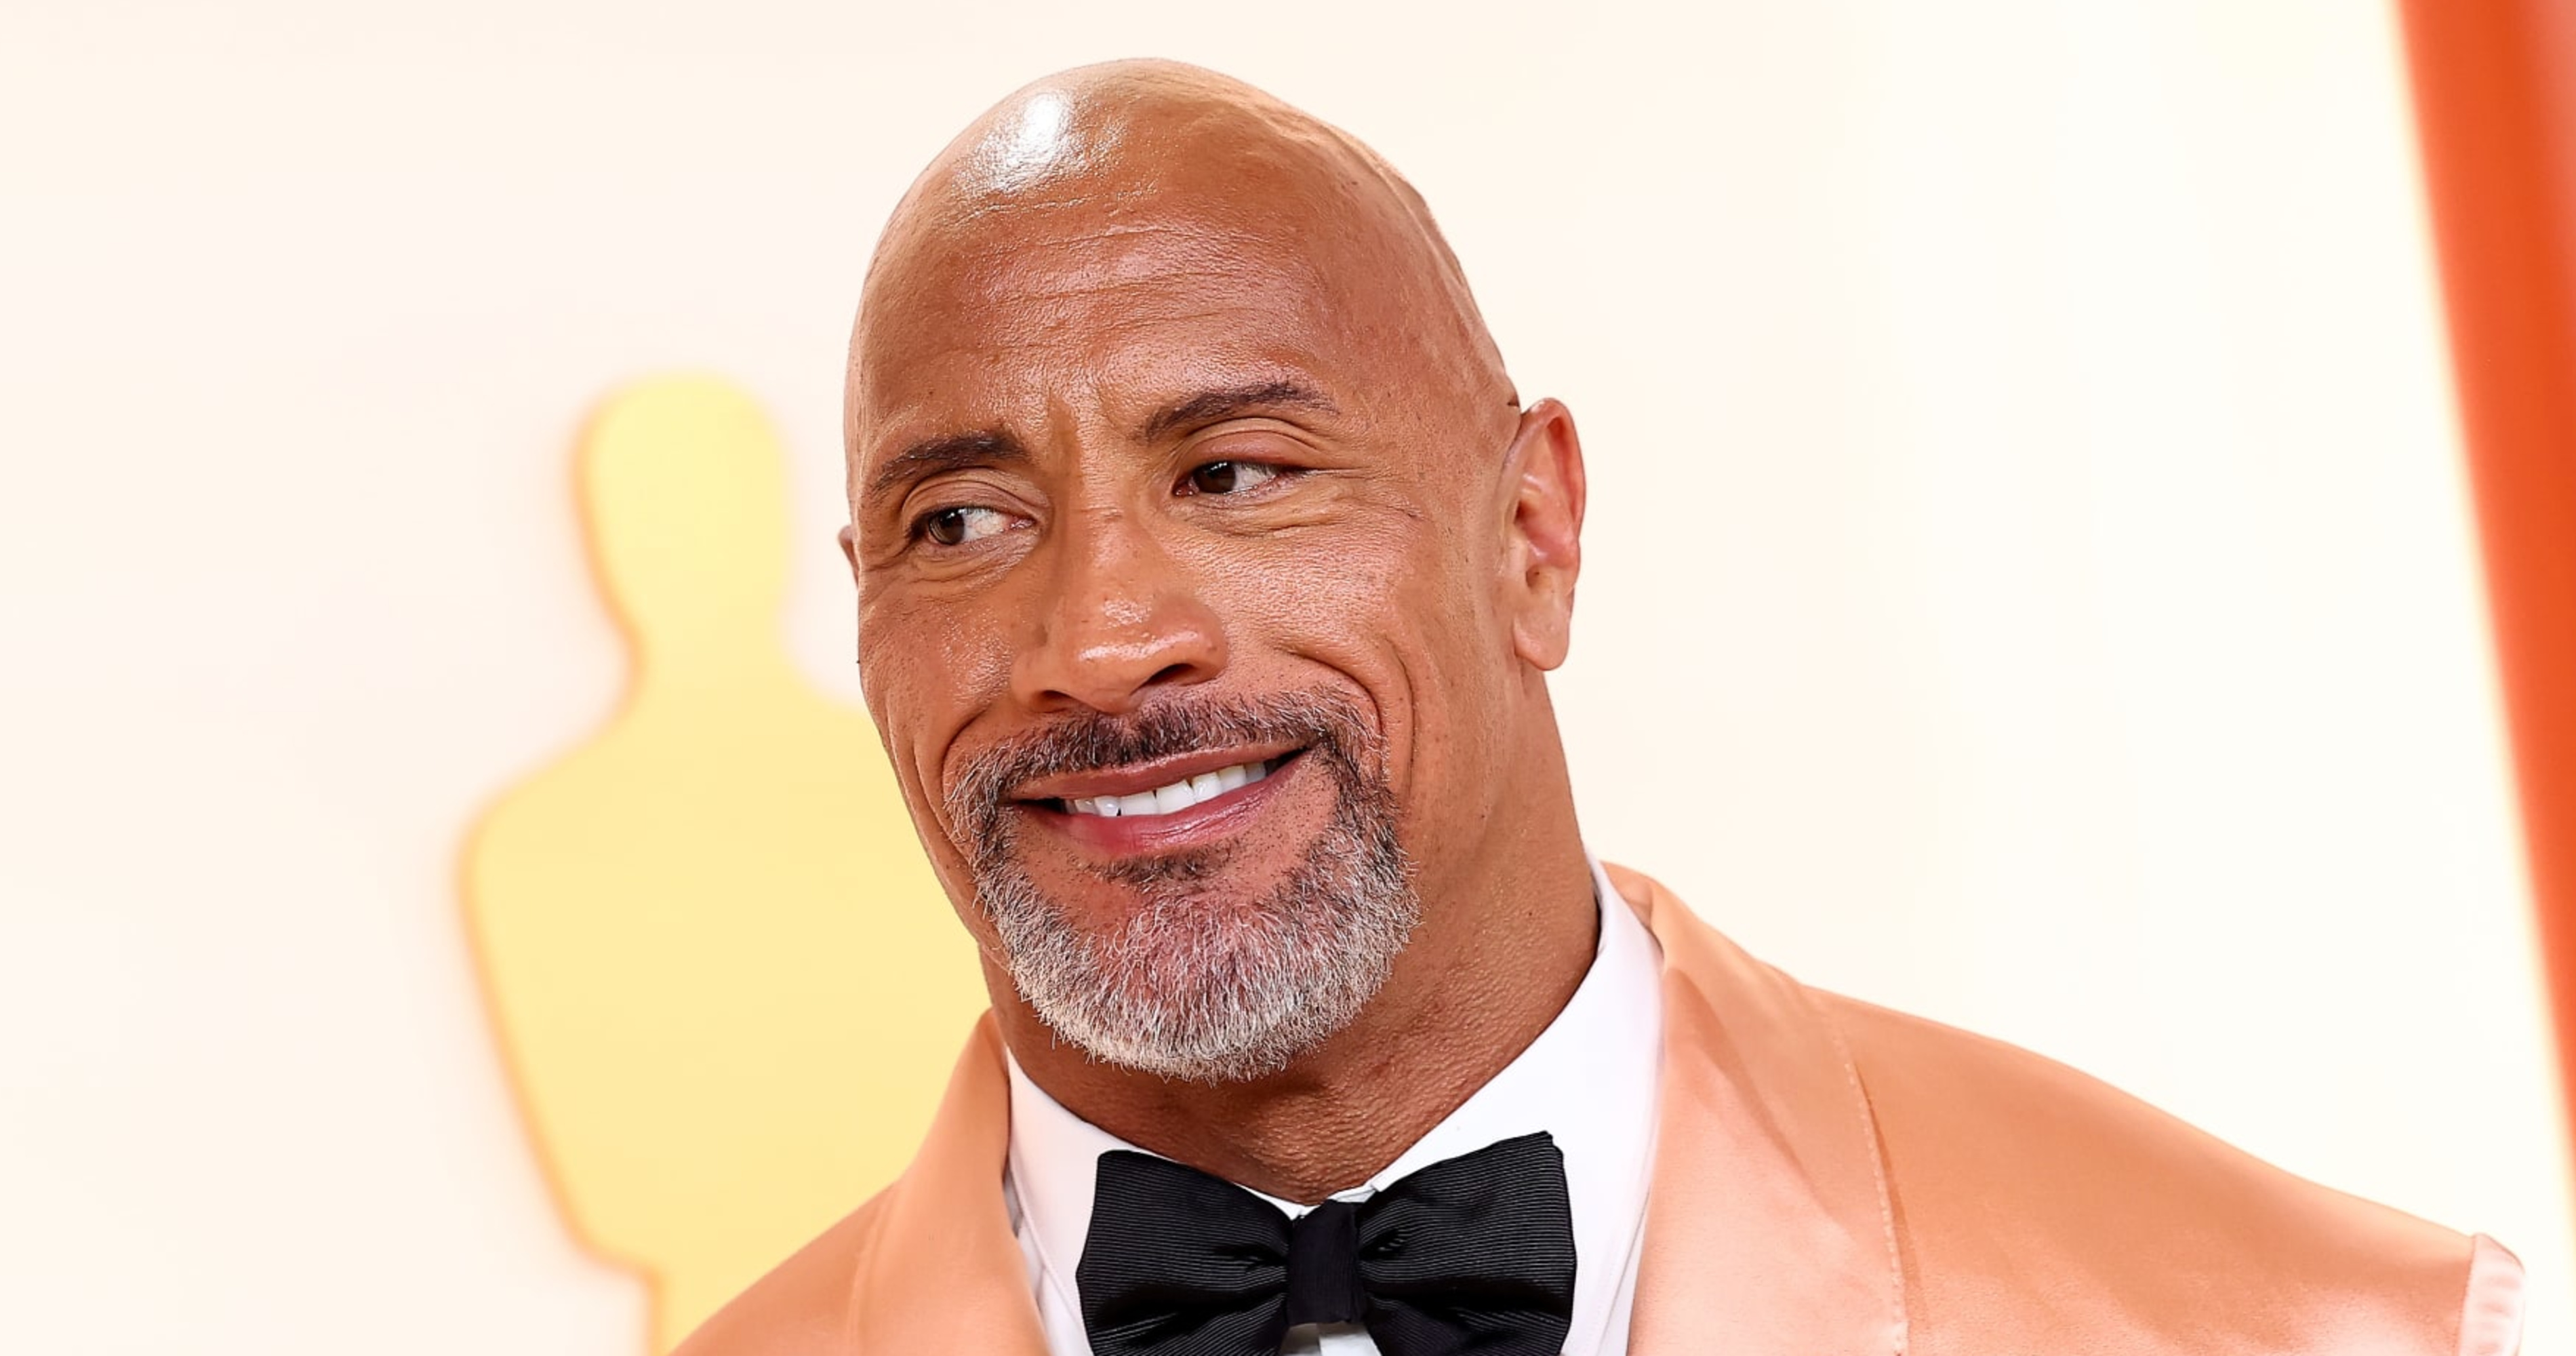 You will always be The Rock's b*tch: Dwayne Johnson Absolutely